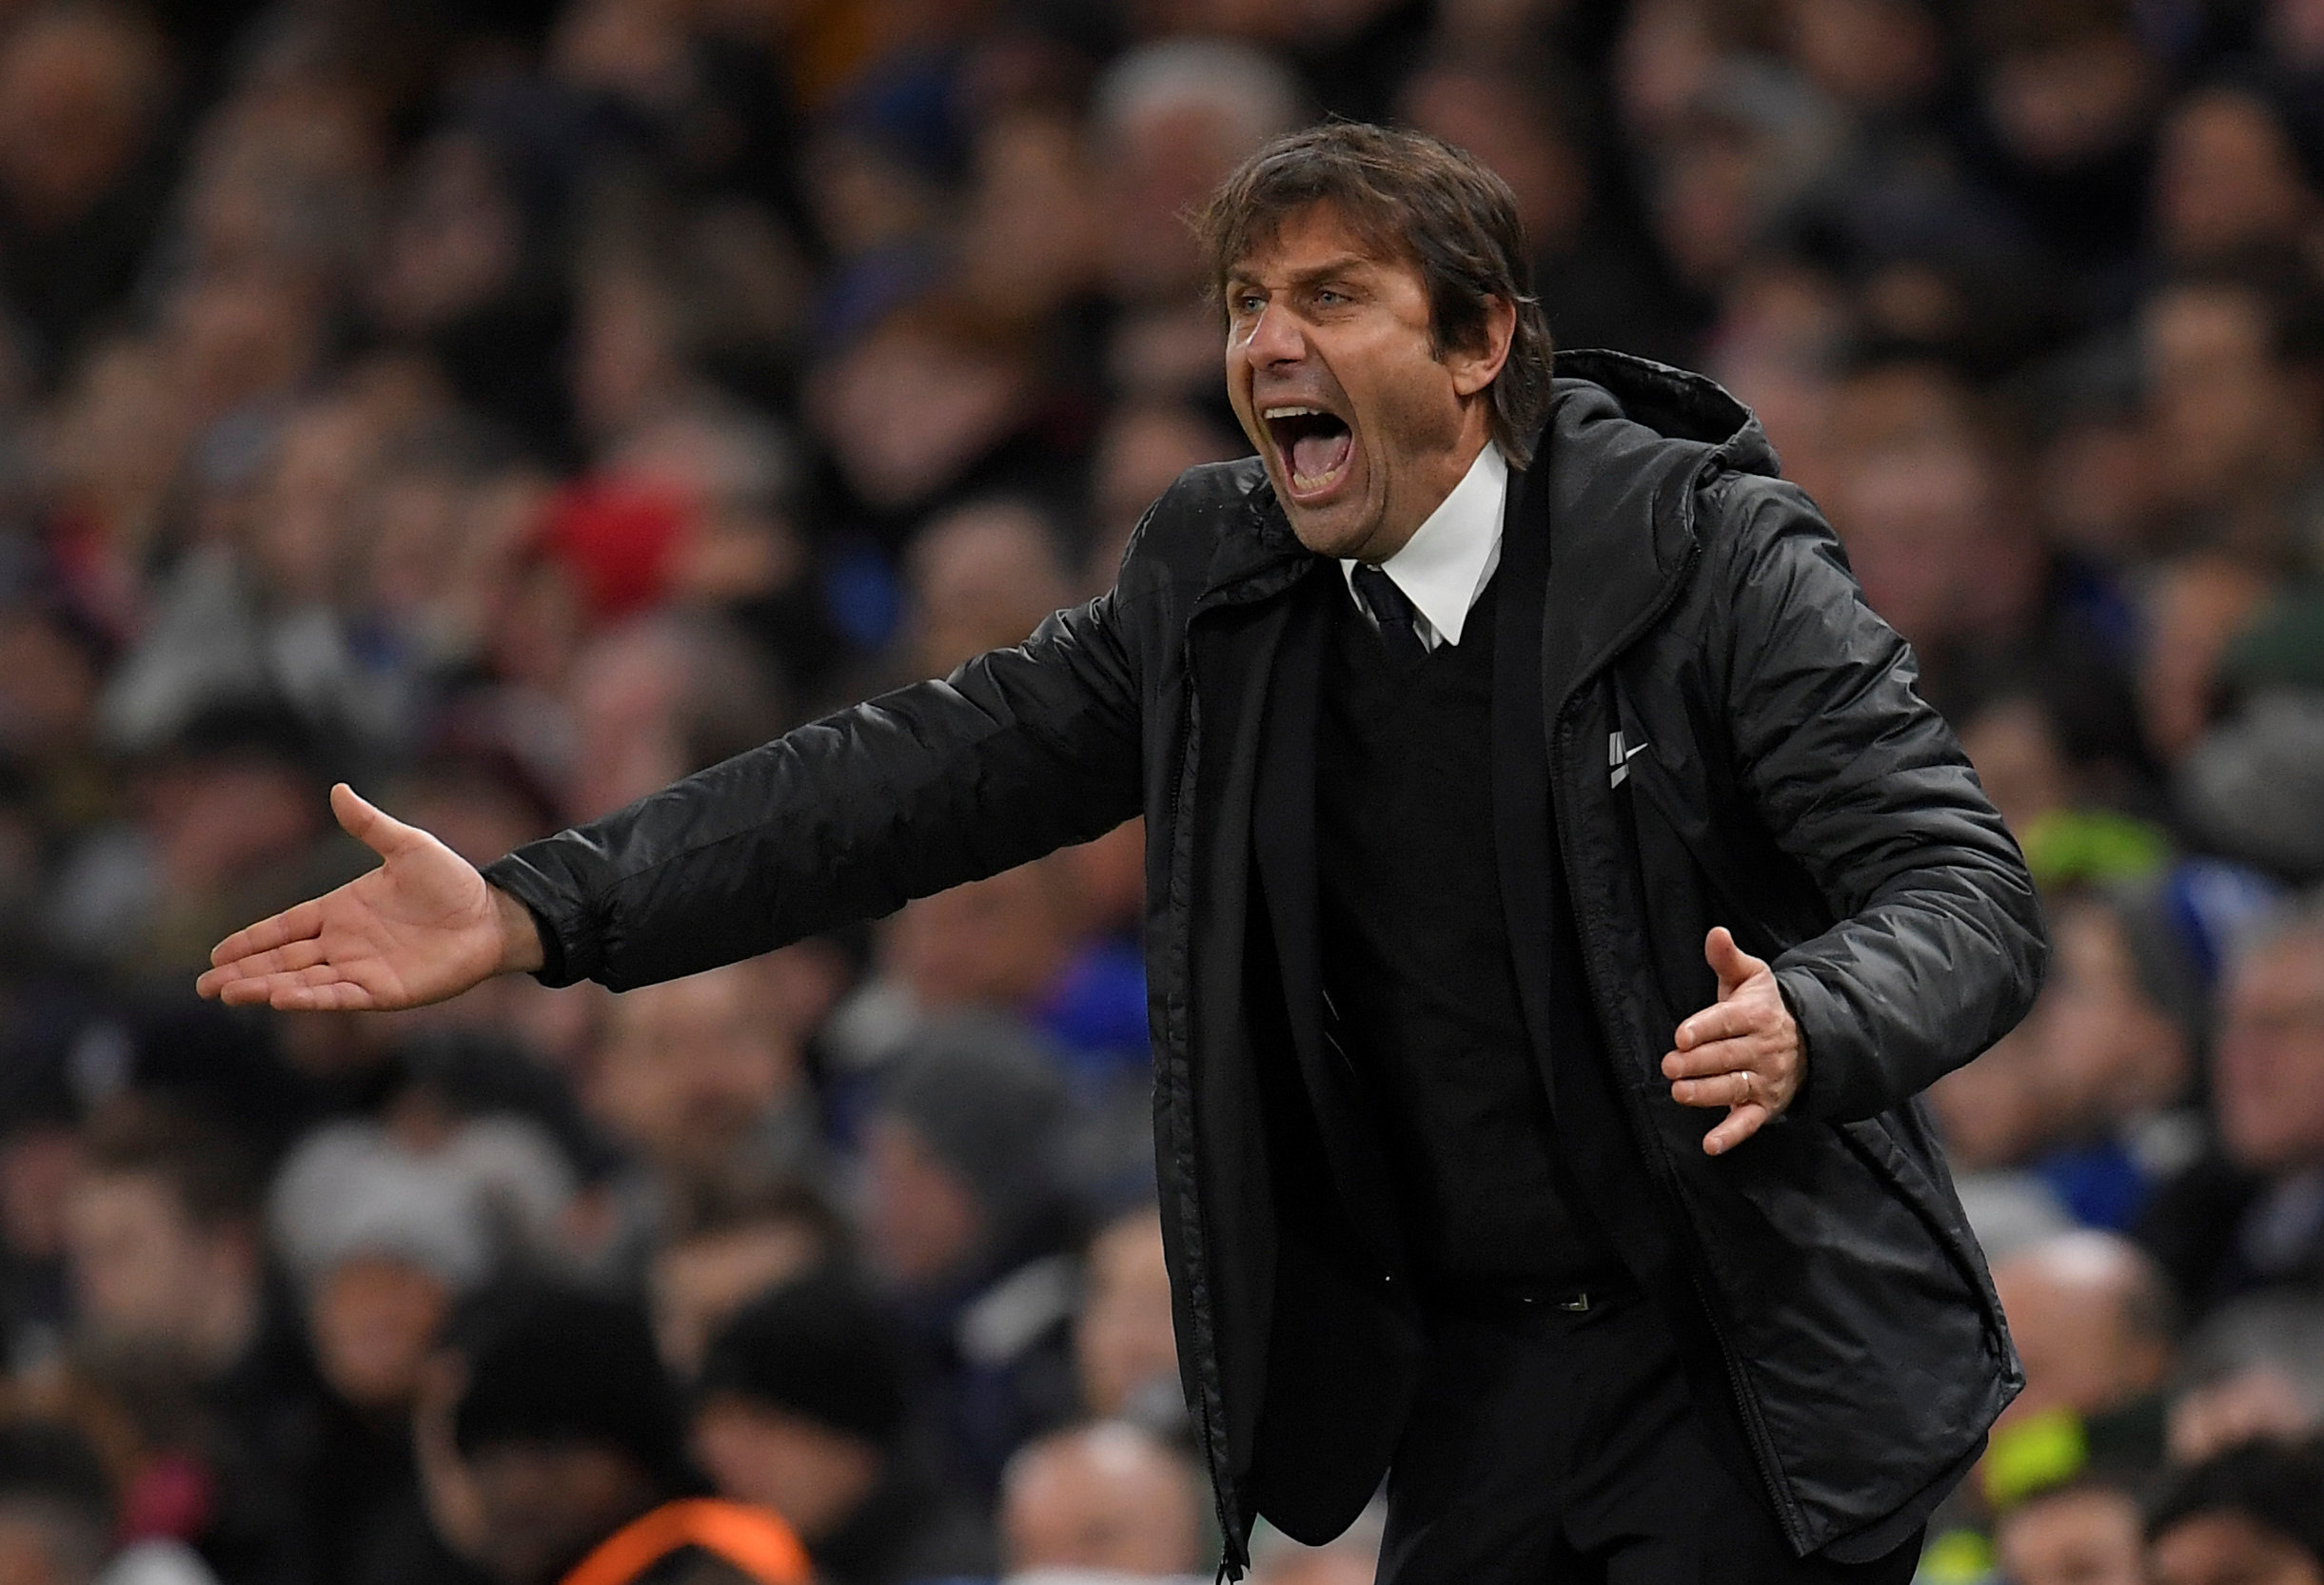 Football: Chelsea's Conte fined for outburst